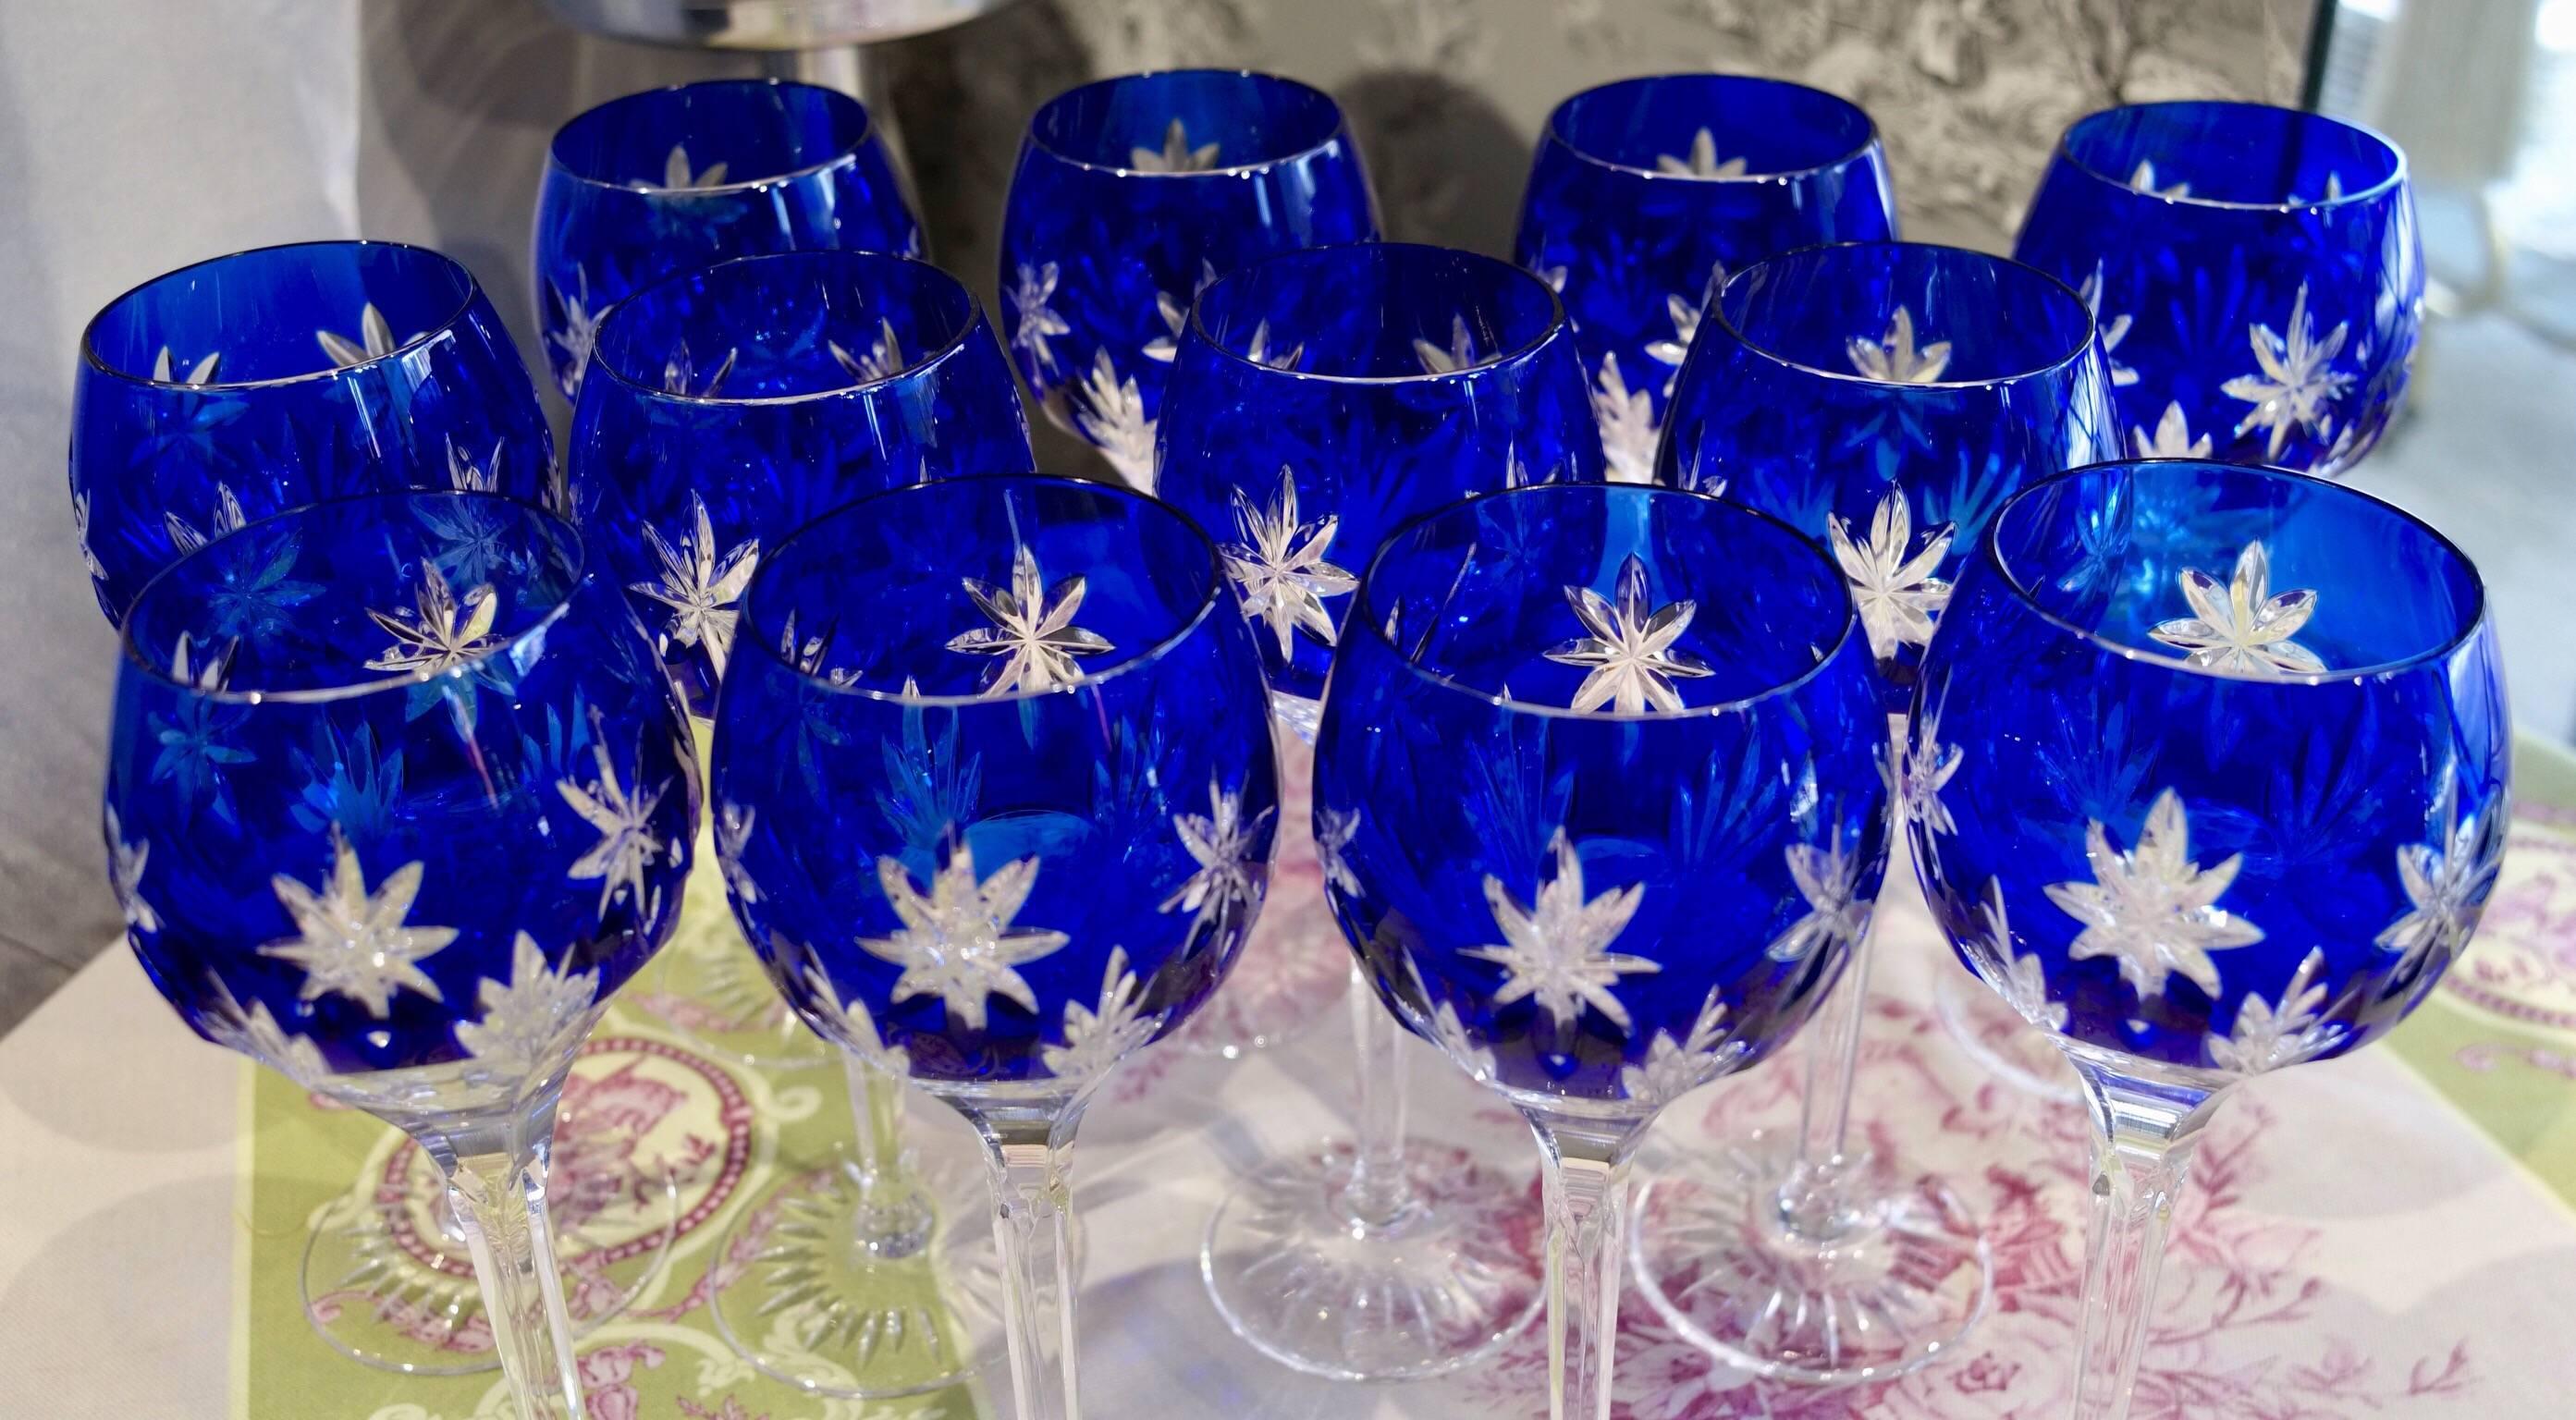 20th Century Blue Crystal Engraved Service, One Carafe and 12 Stemmed Glasses, circa 1950